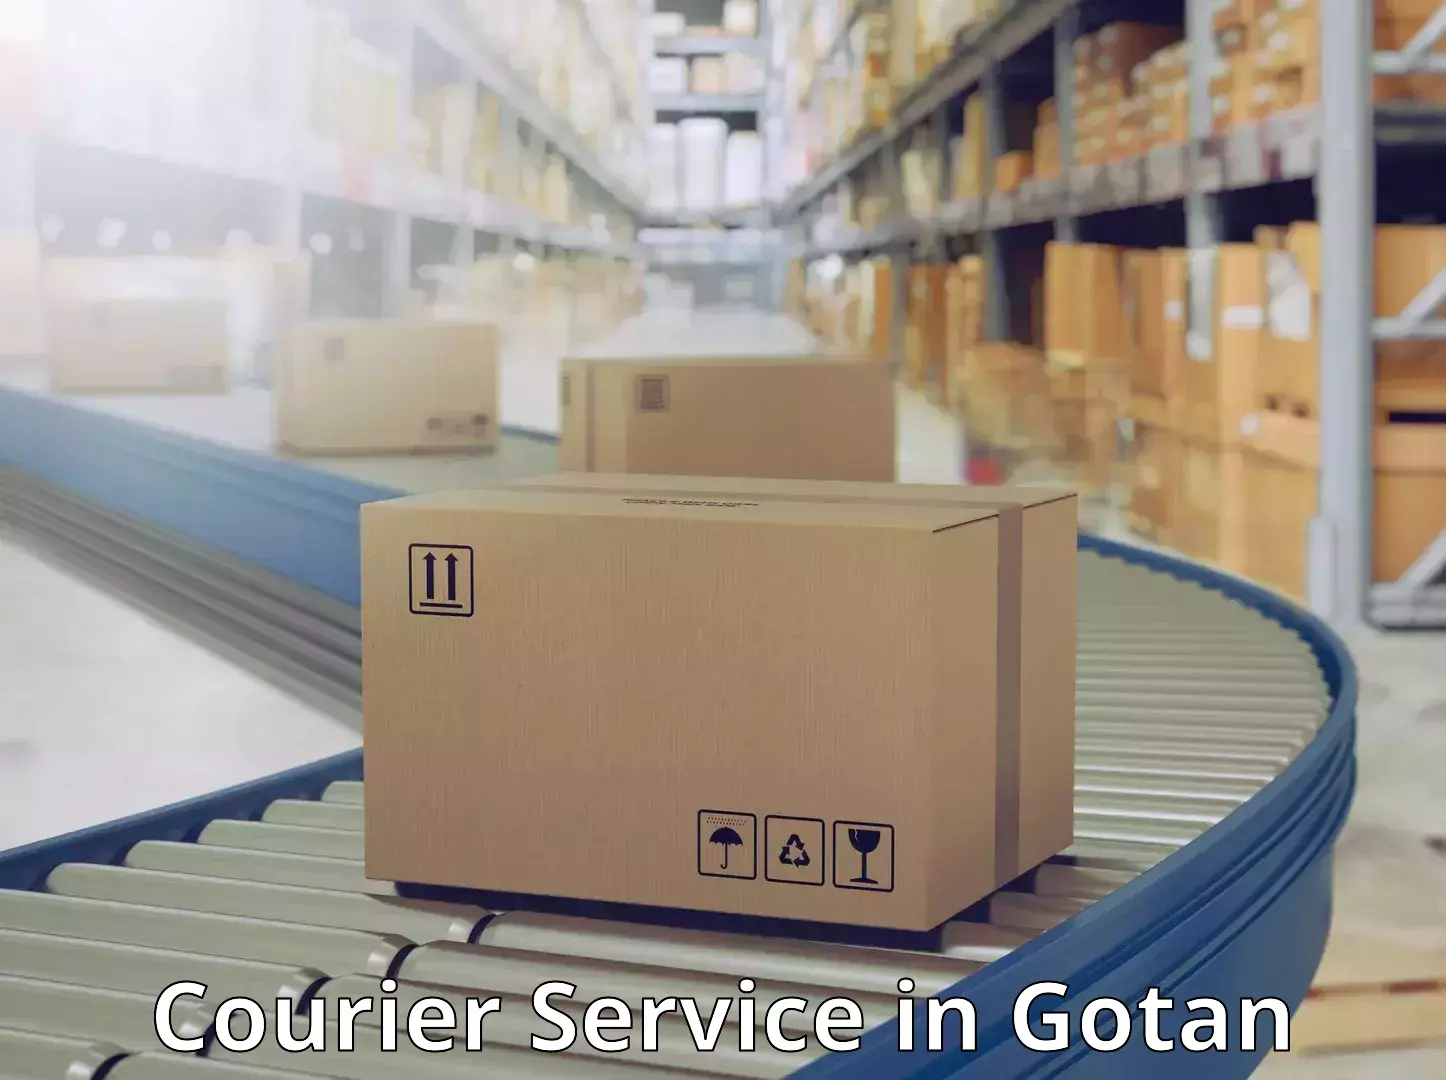 Courier service innovation in Gotan